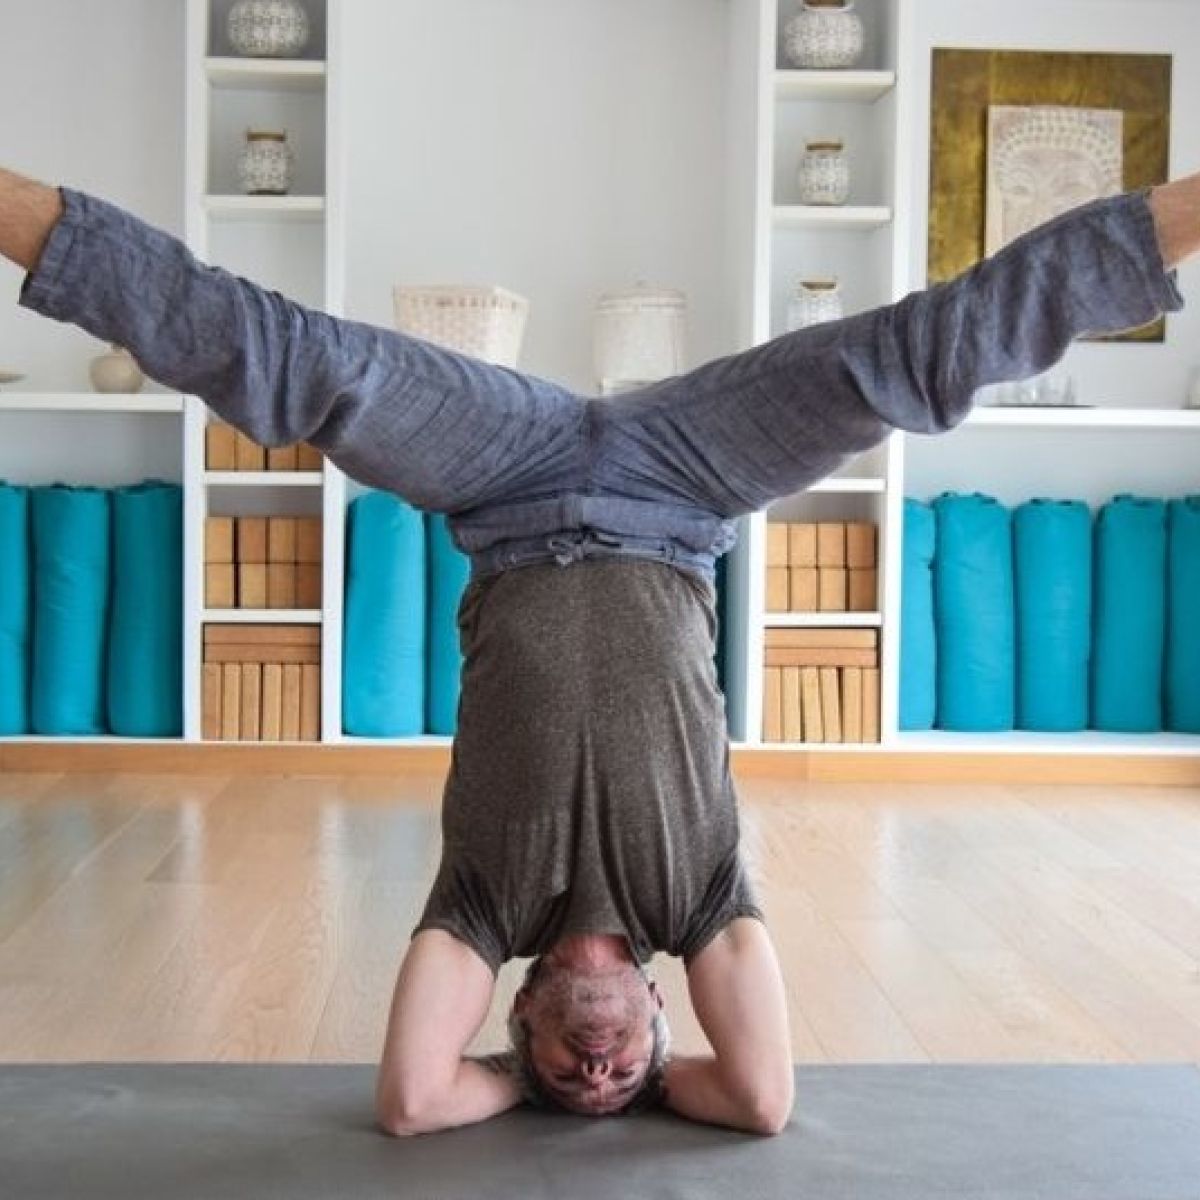 Yoga With President Michael D Higgins This Could Be Your Chance